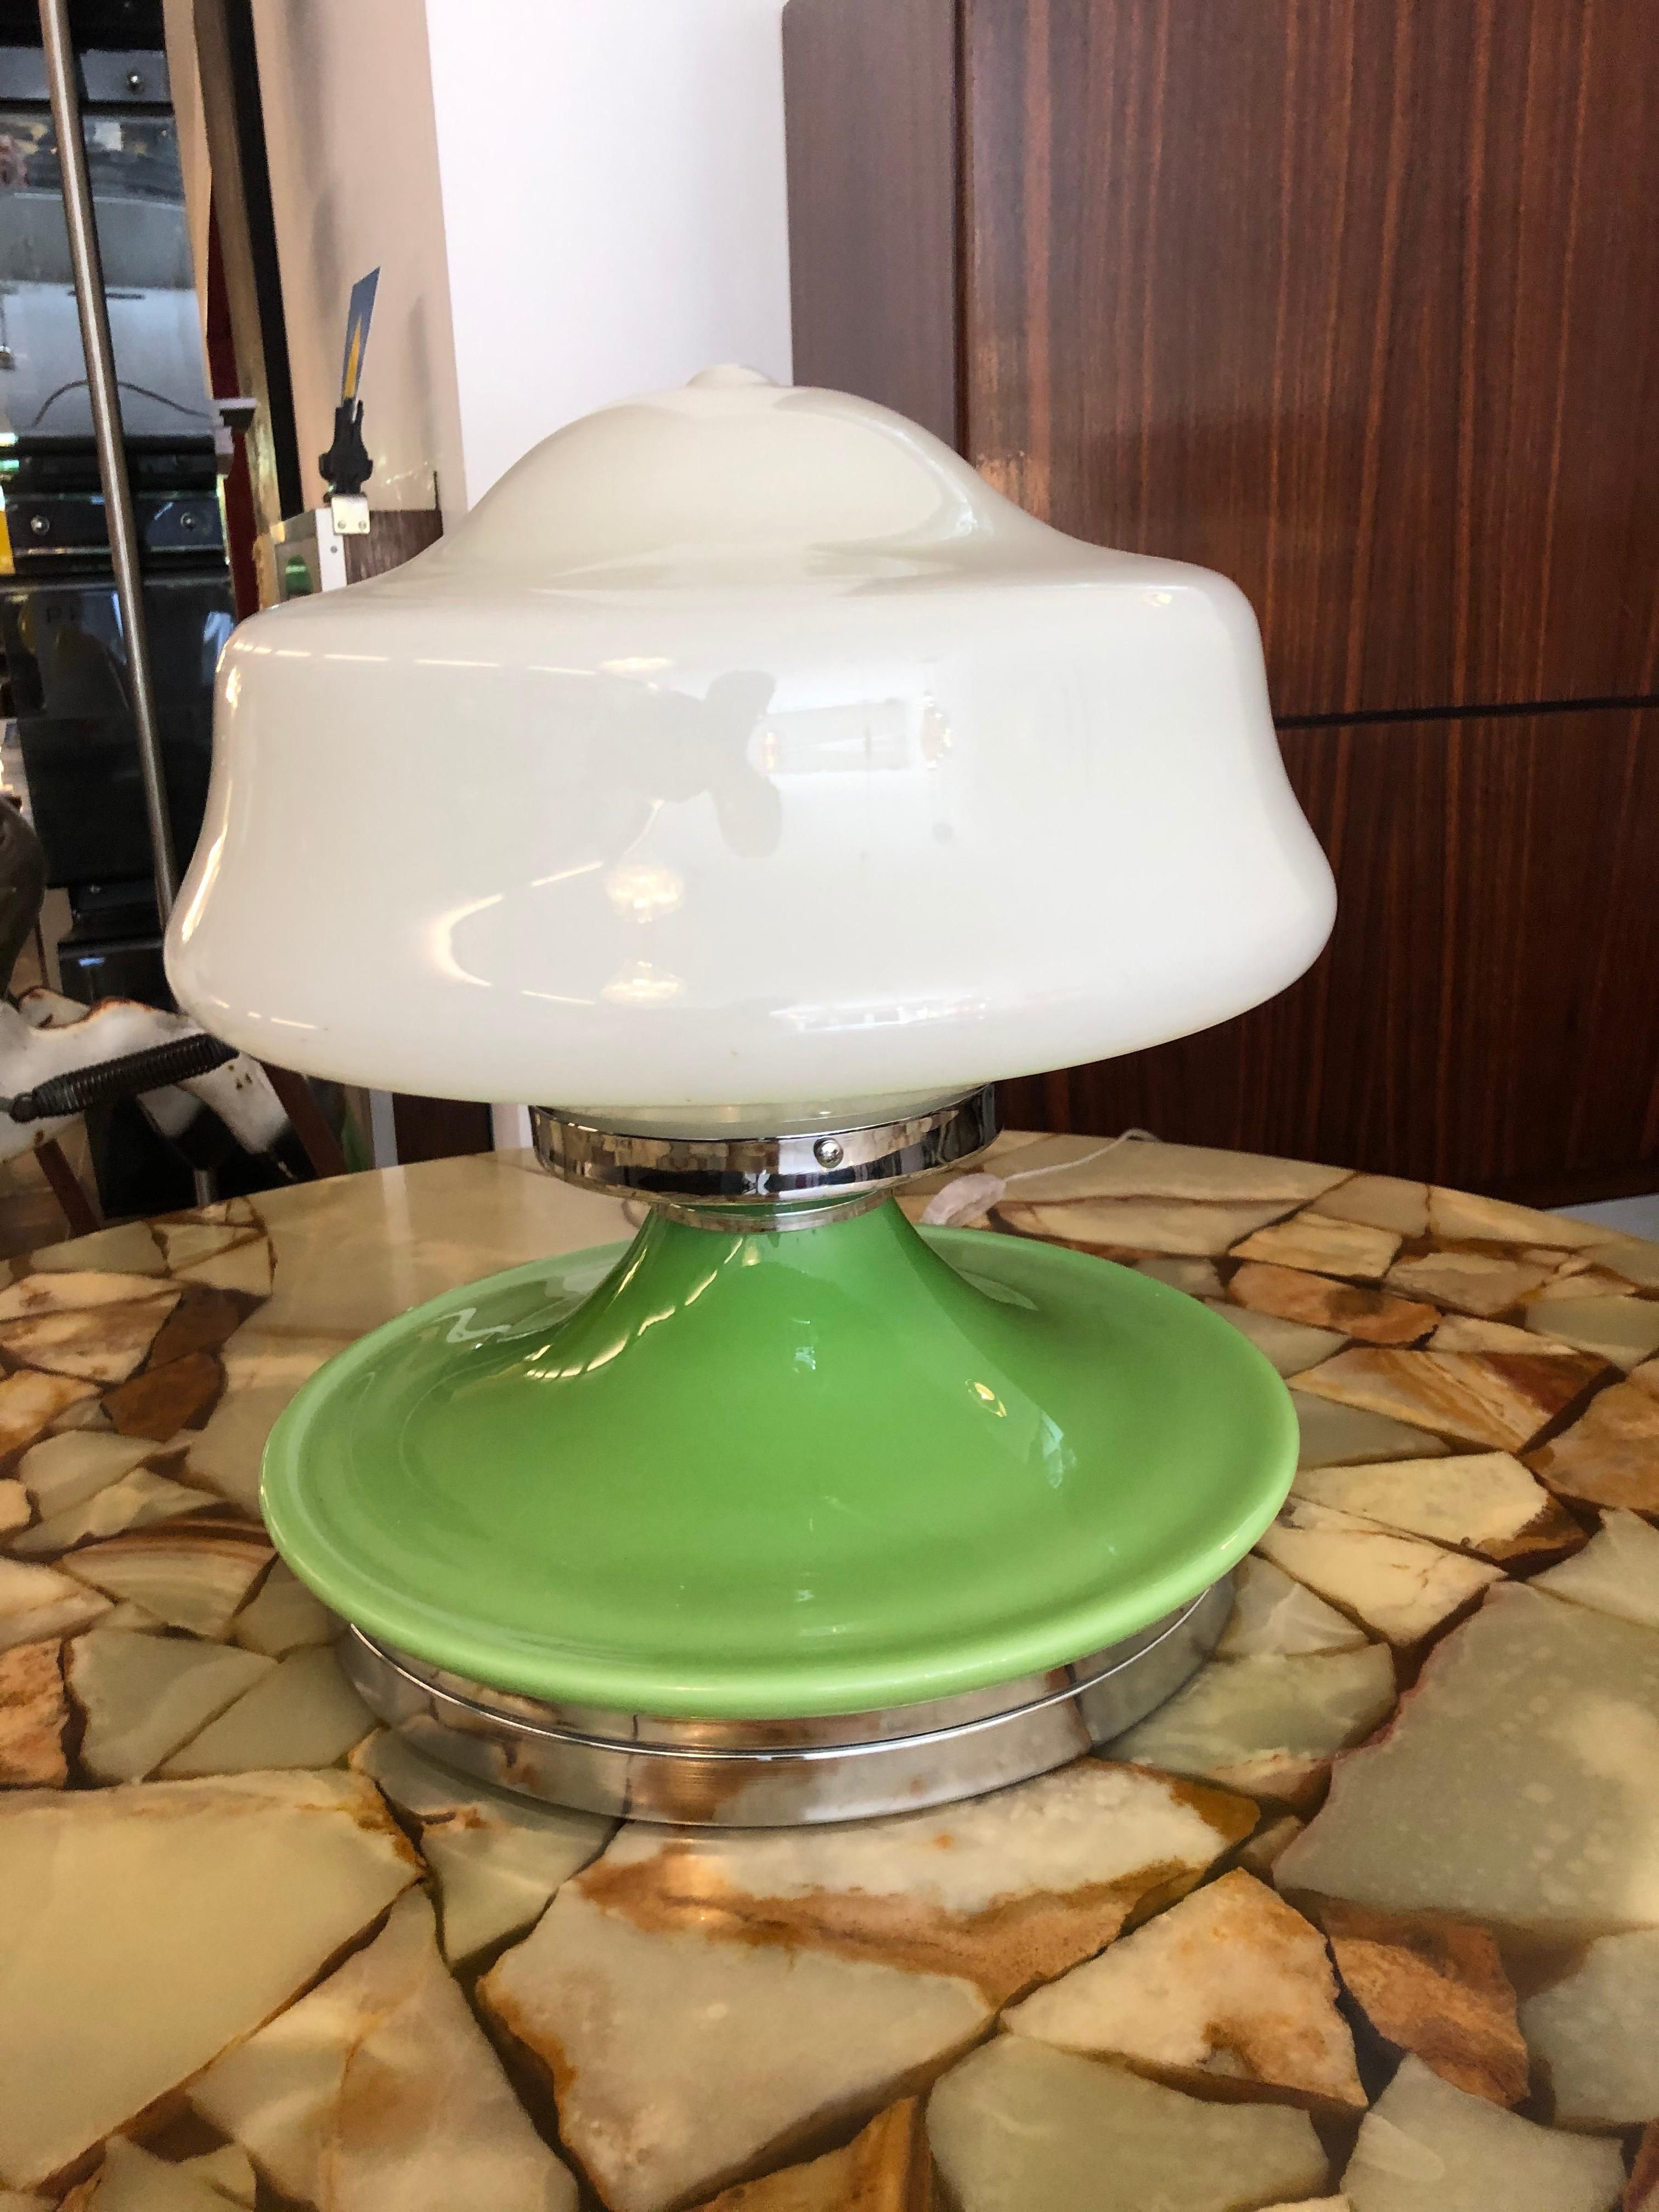 Rare green and white opaline glass table lamp, 1970s
made of opaline glass
re-polished
fully functional
very good condition
in the style of Sergio Mazza.